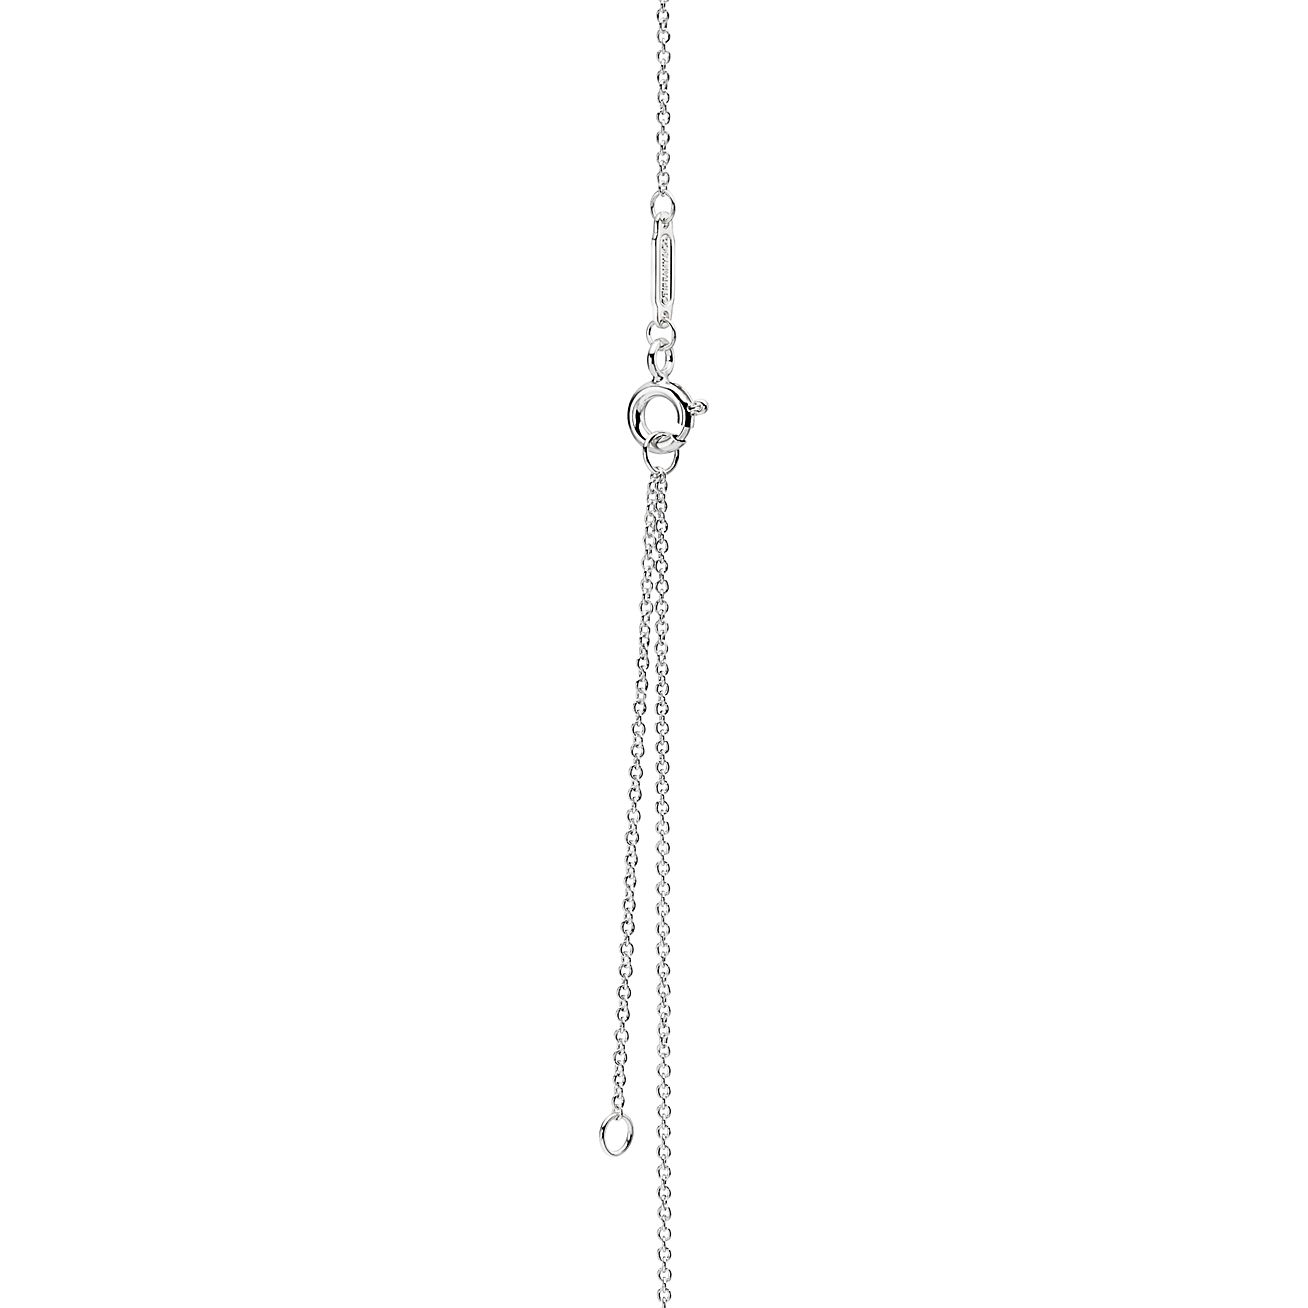 Return to Tiffany® Heart Tag Pendant in Sterling Silver with a Diamond,  Mini